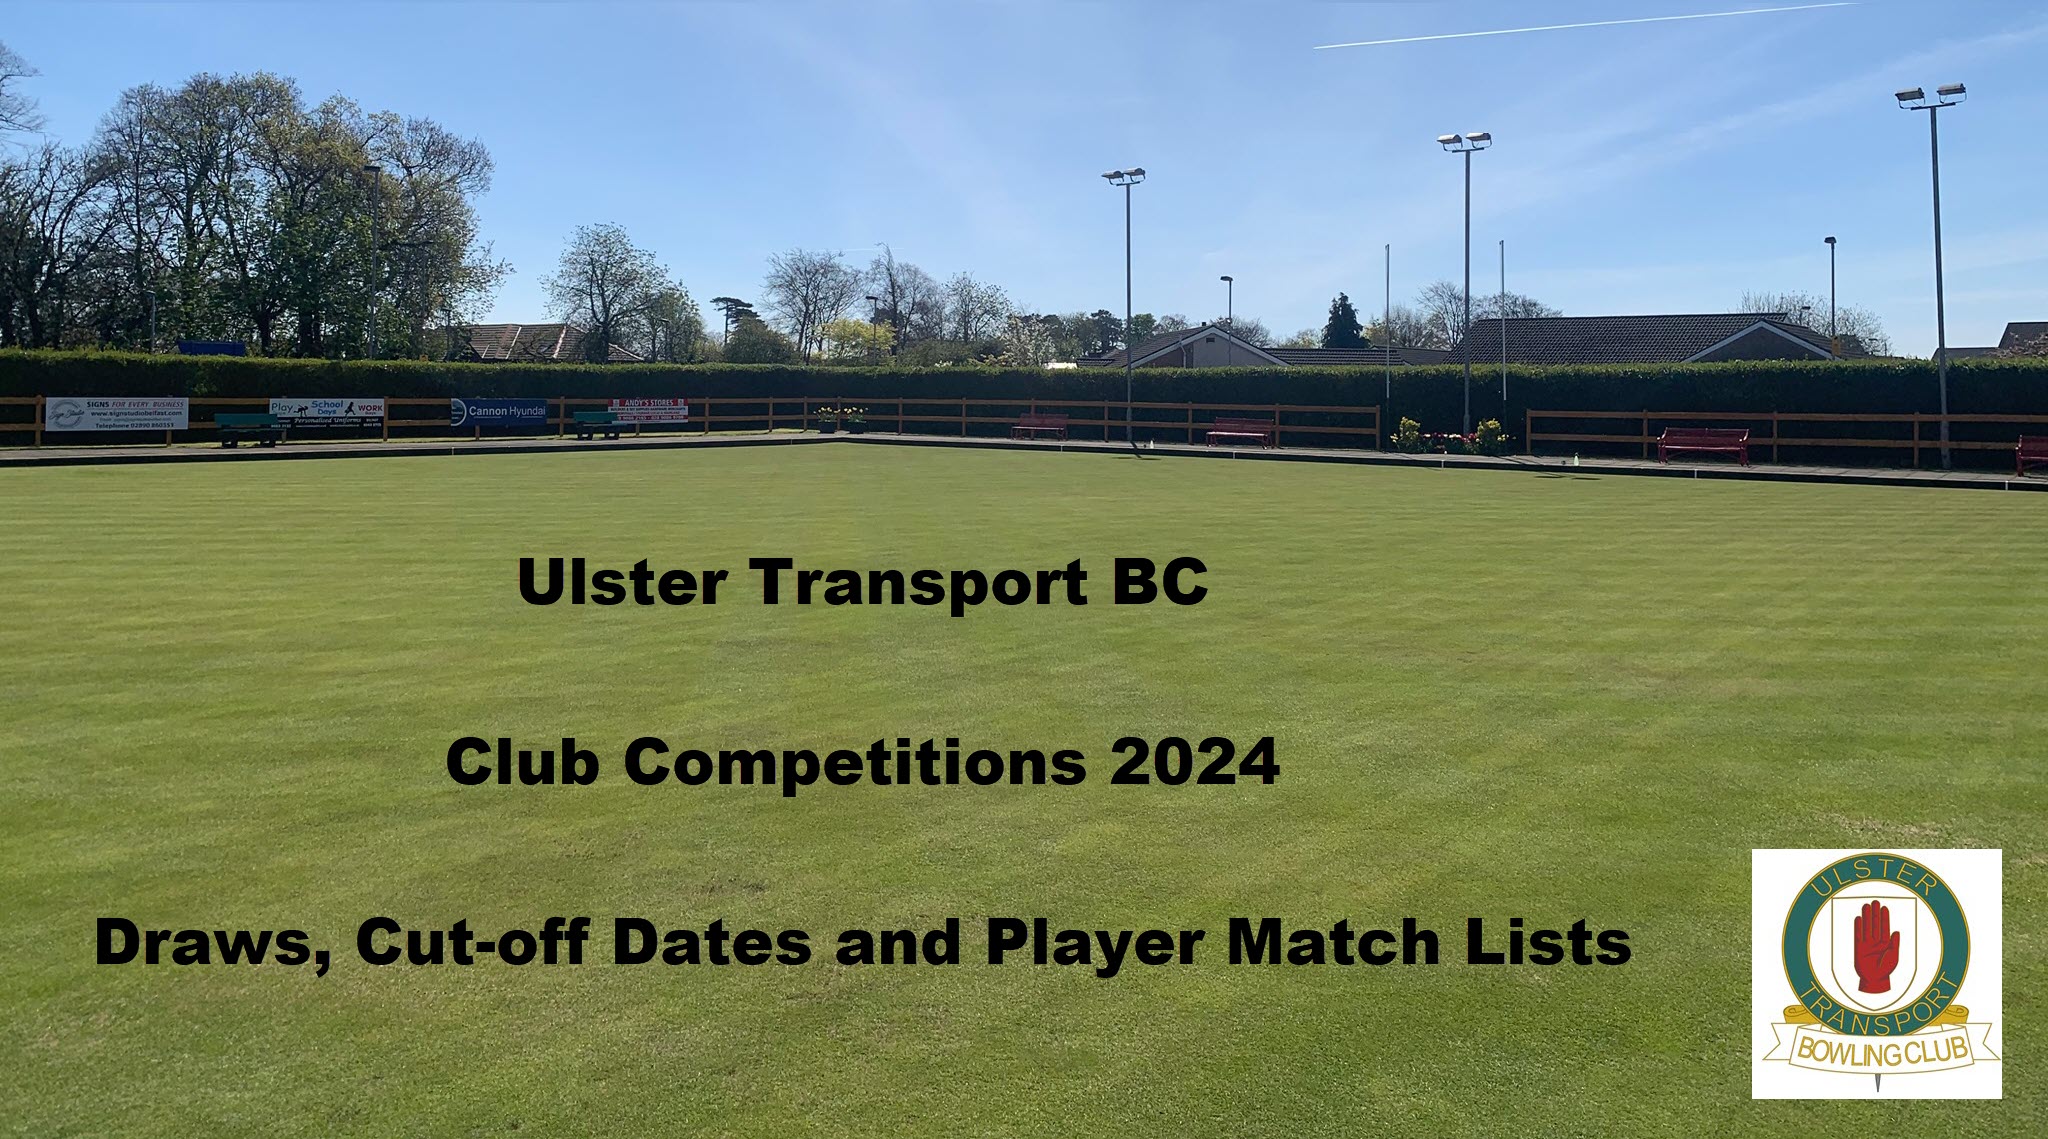 UTBC Competitions 2024 - Information and List of Matches by Cut-off Dates